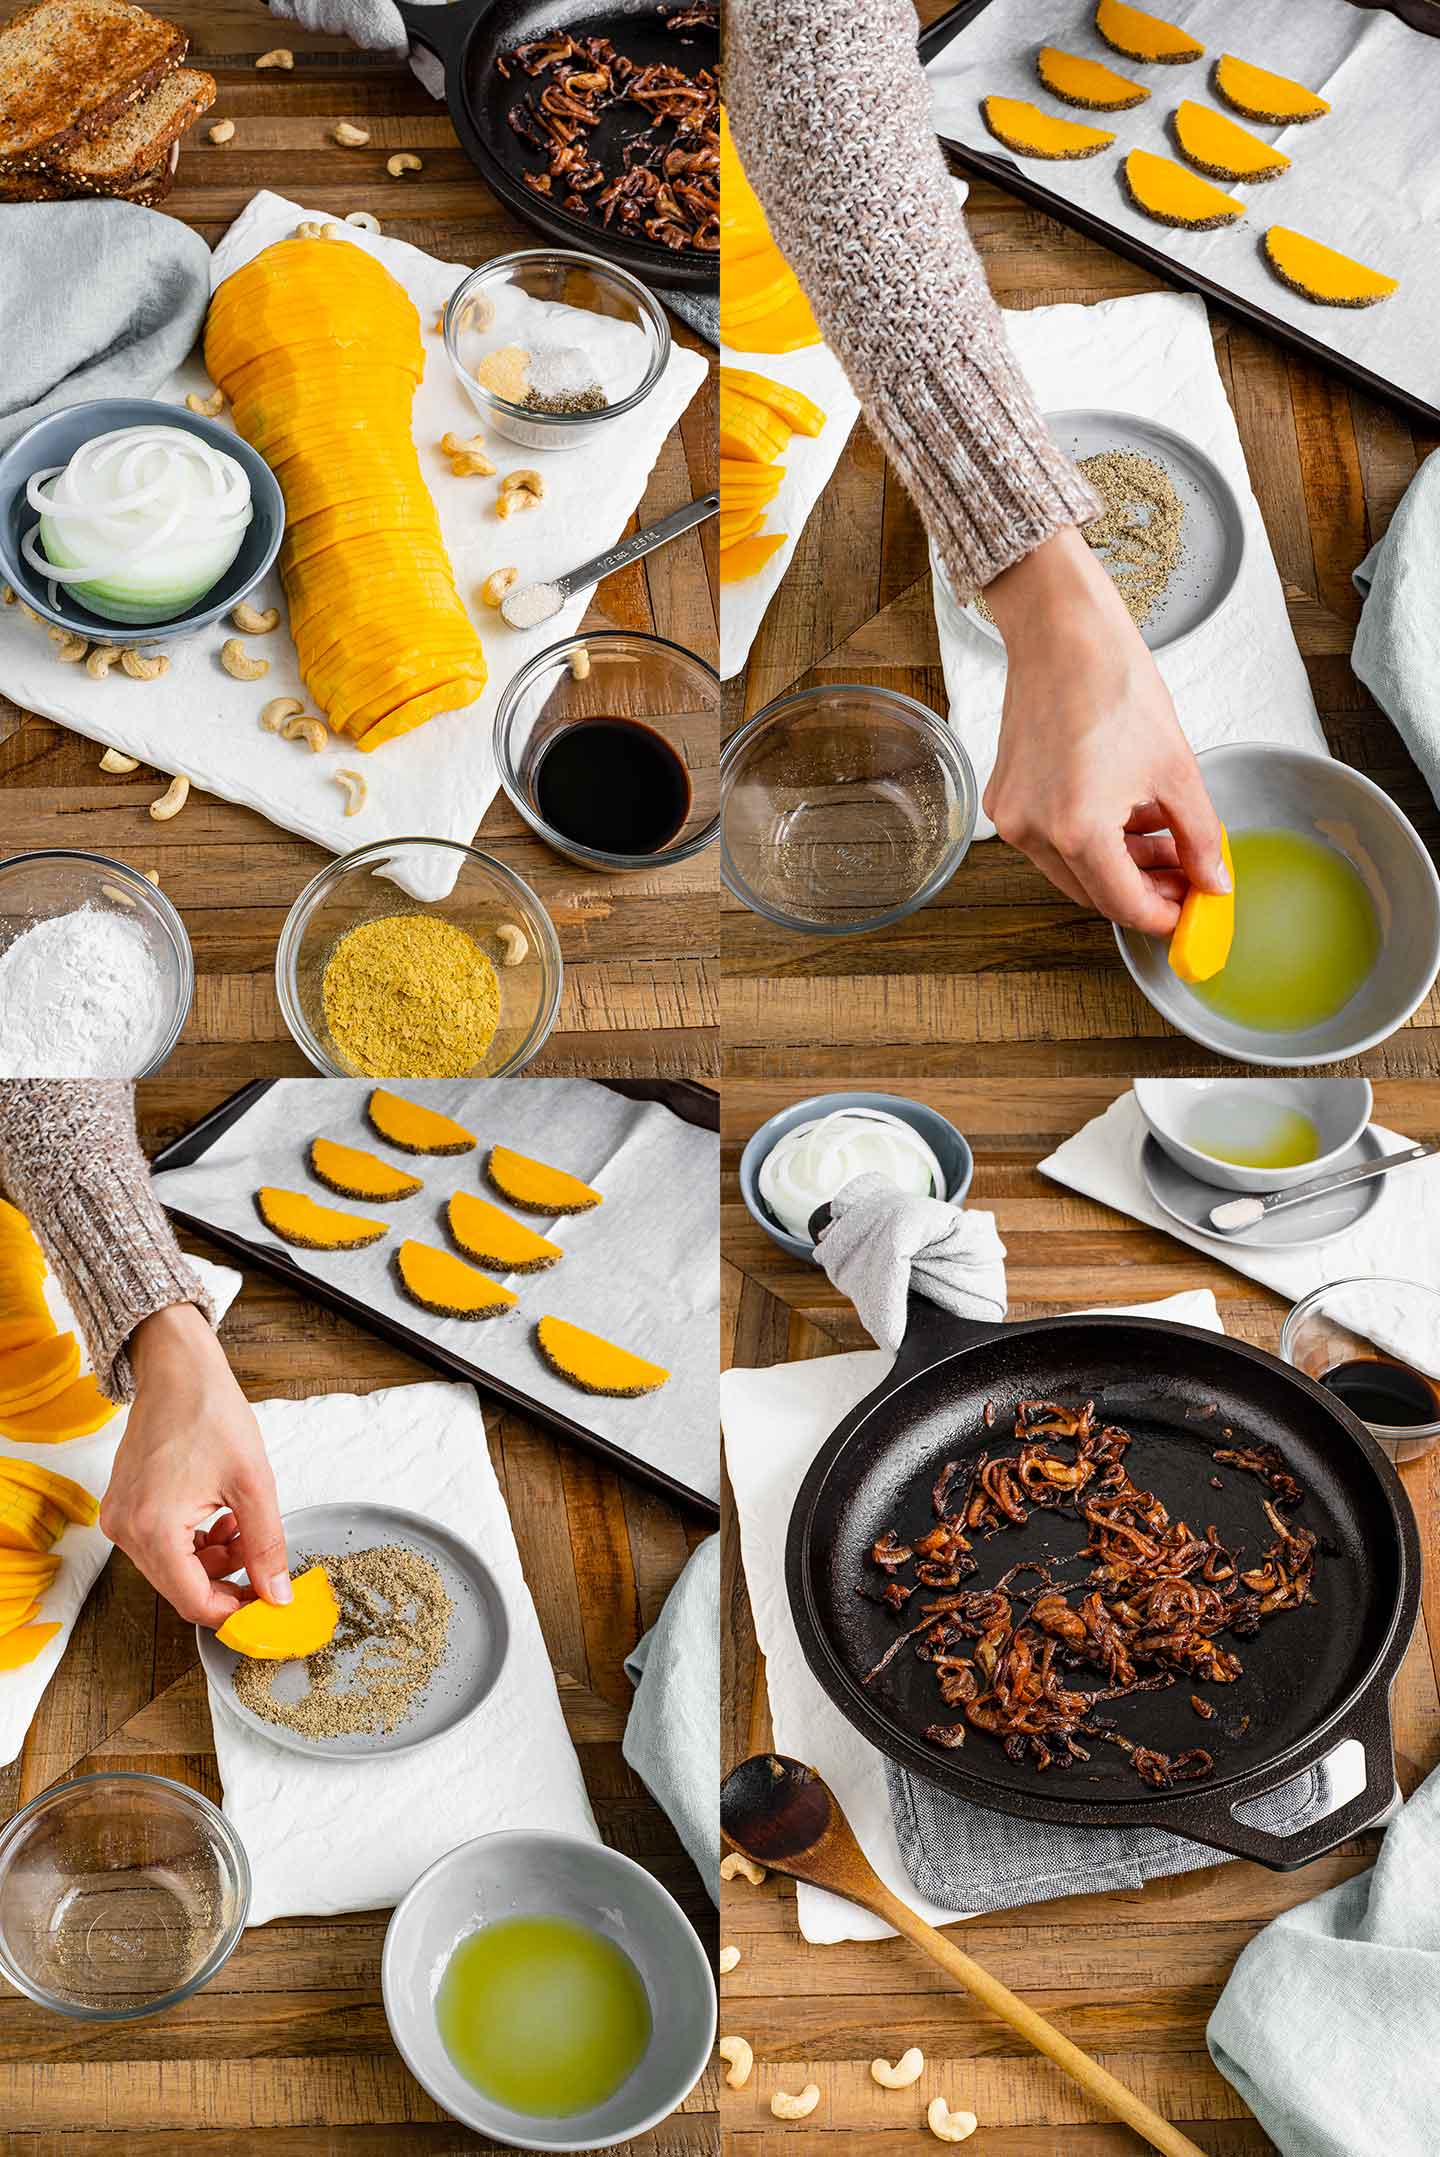 Grid of four process photos. Butternut squash is peeled and sliced. Then rolled in olive oil and dry spices. Balsamic onions are also pictured.